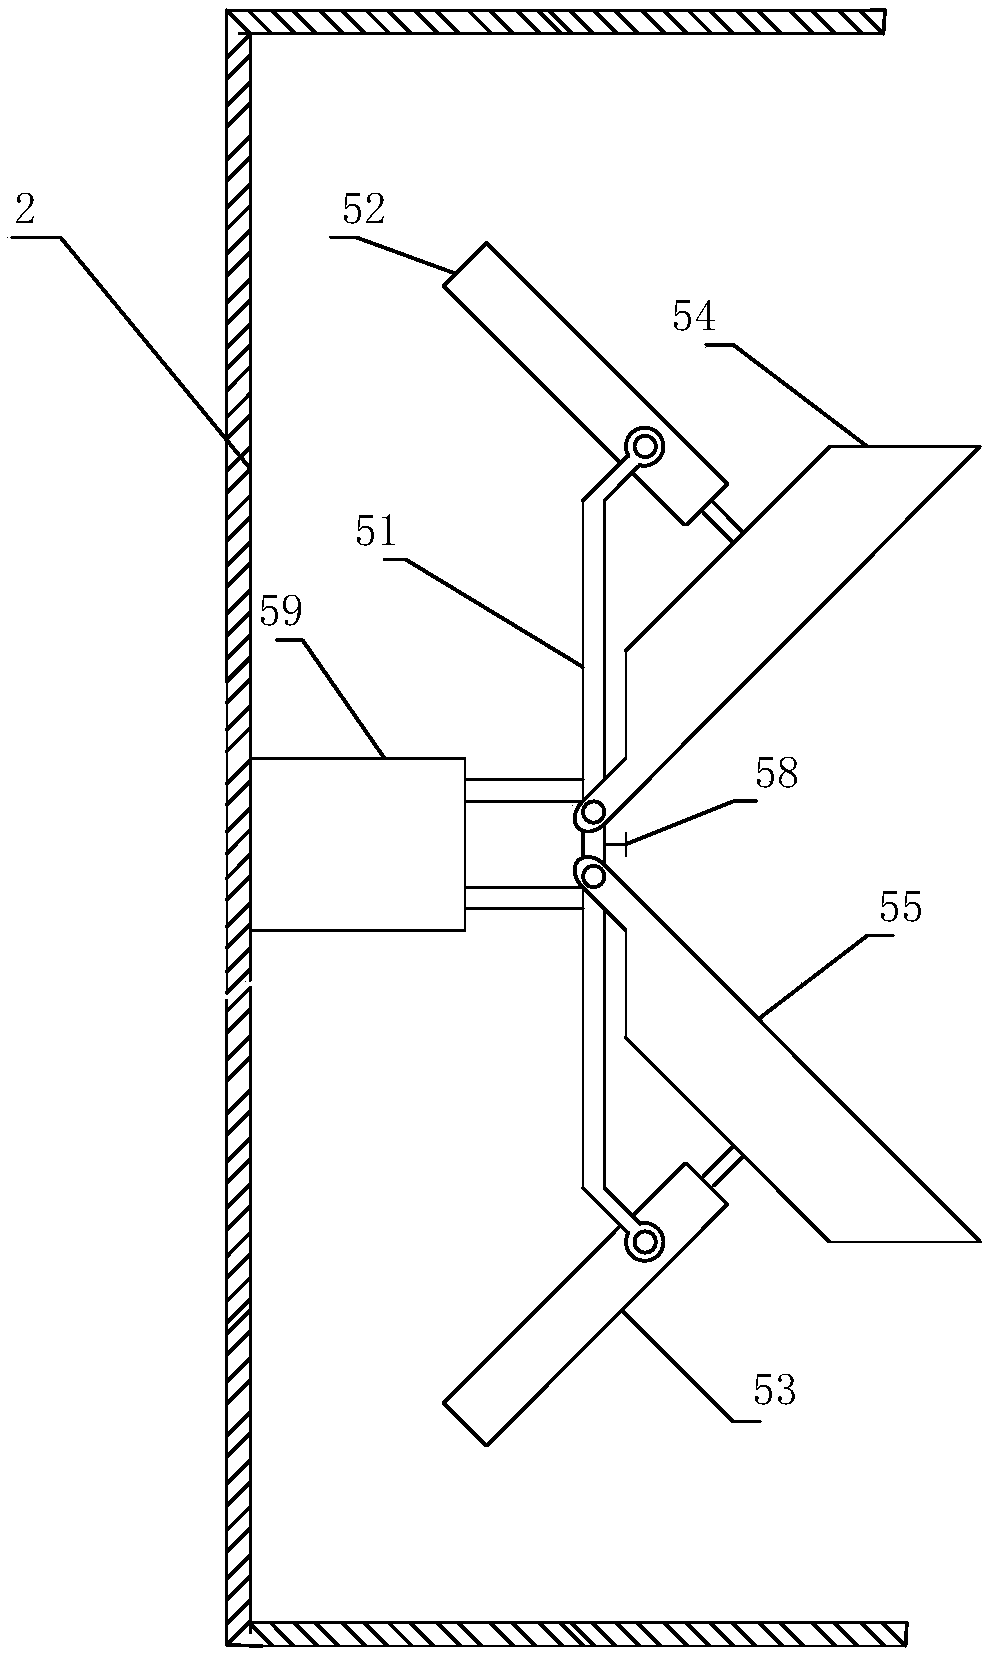 Corrugated line automatic guiding and pasting edge banding equipment and its application method